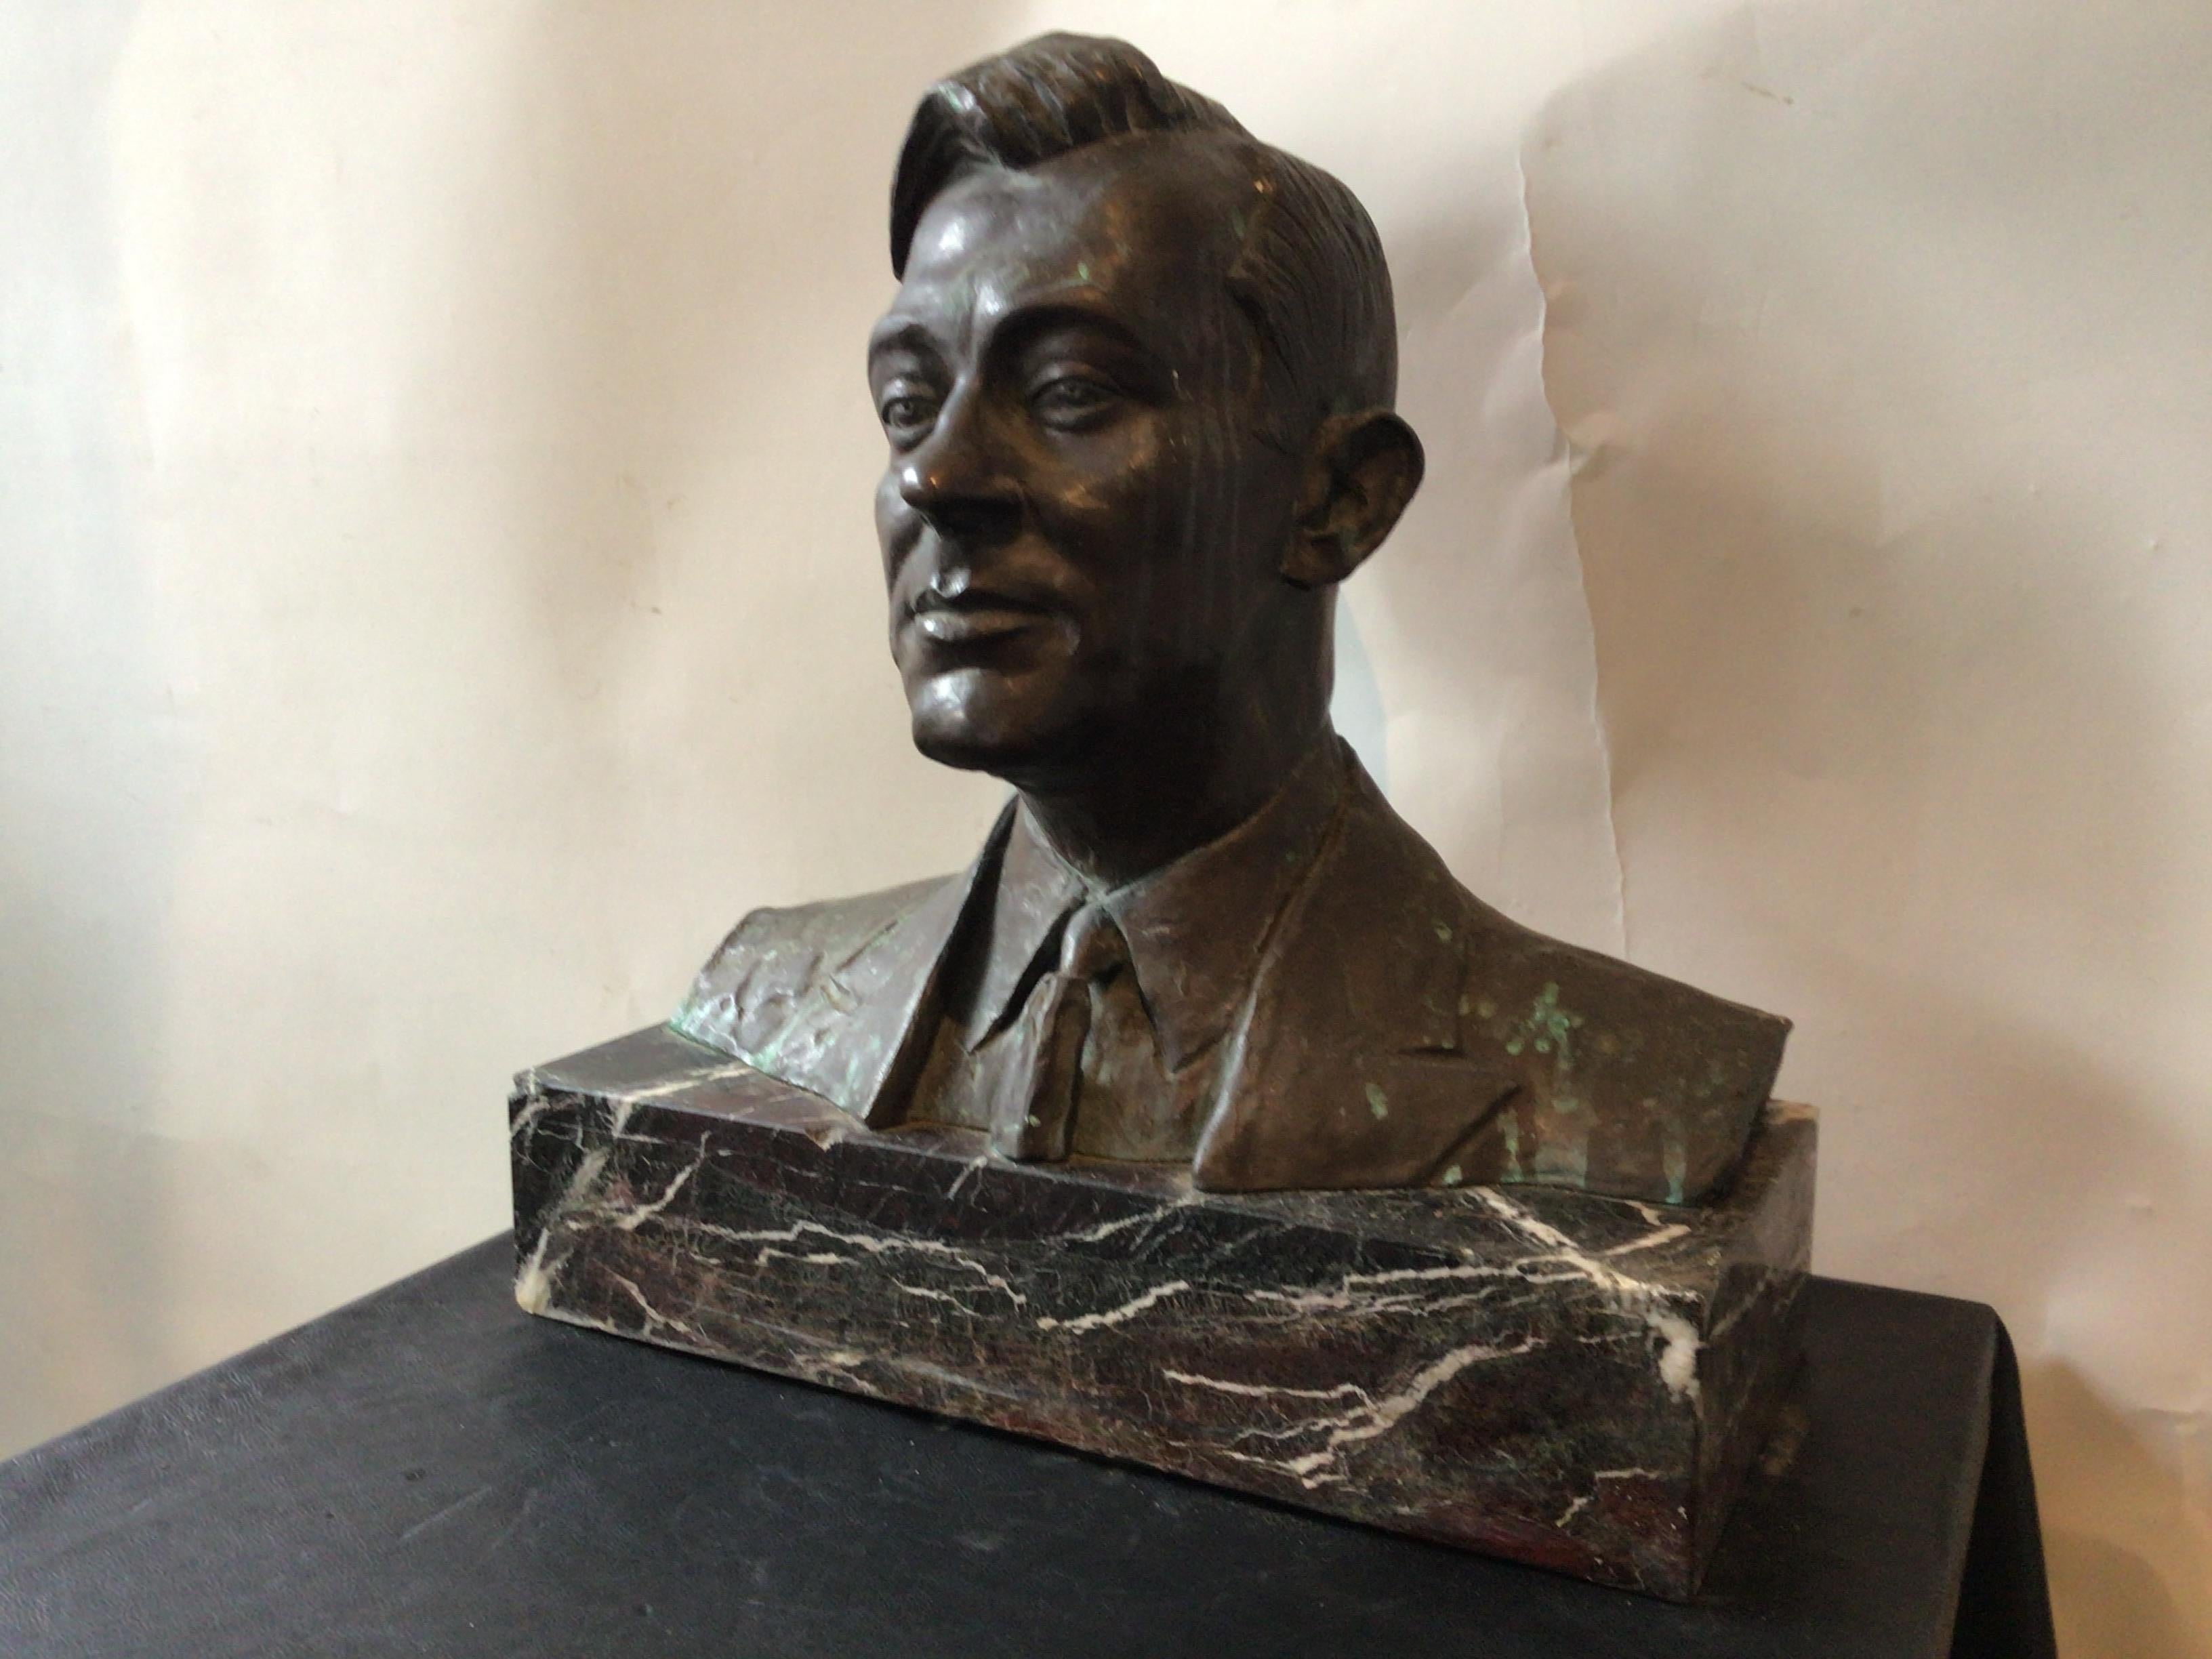 1950s Bronze bust of man on a marble base signed by artist.
Says City Hall New York on back. 1952.